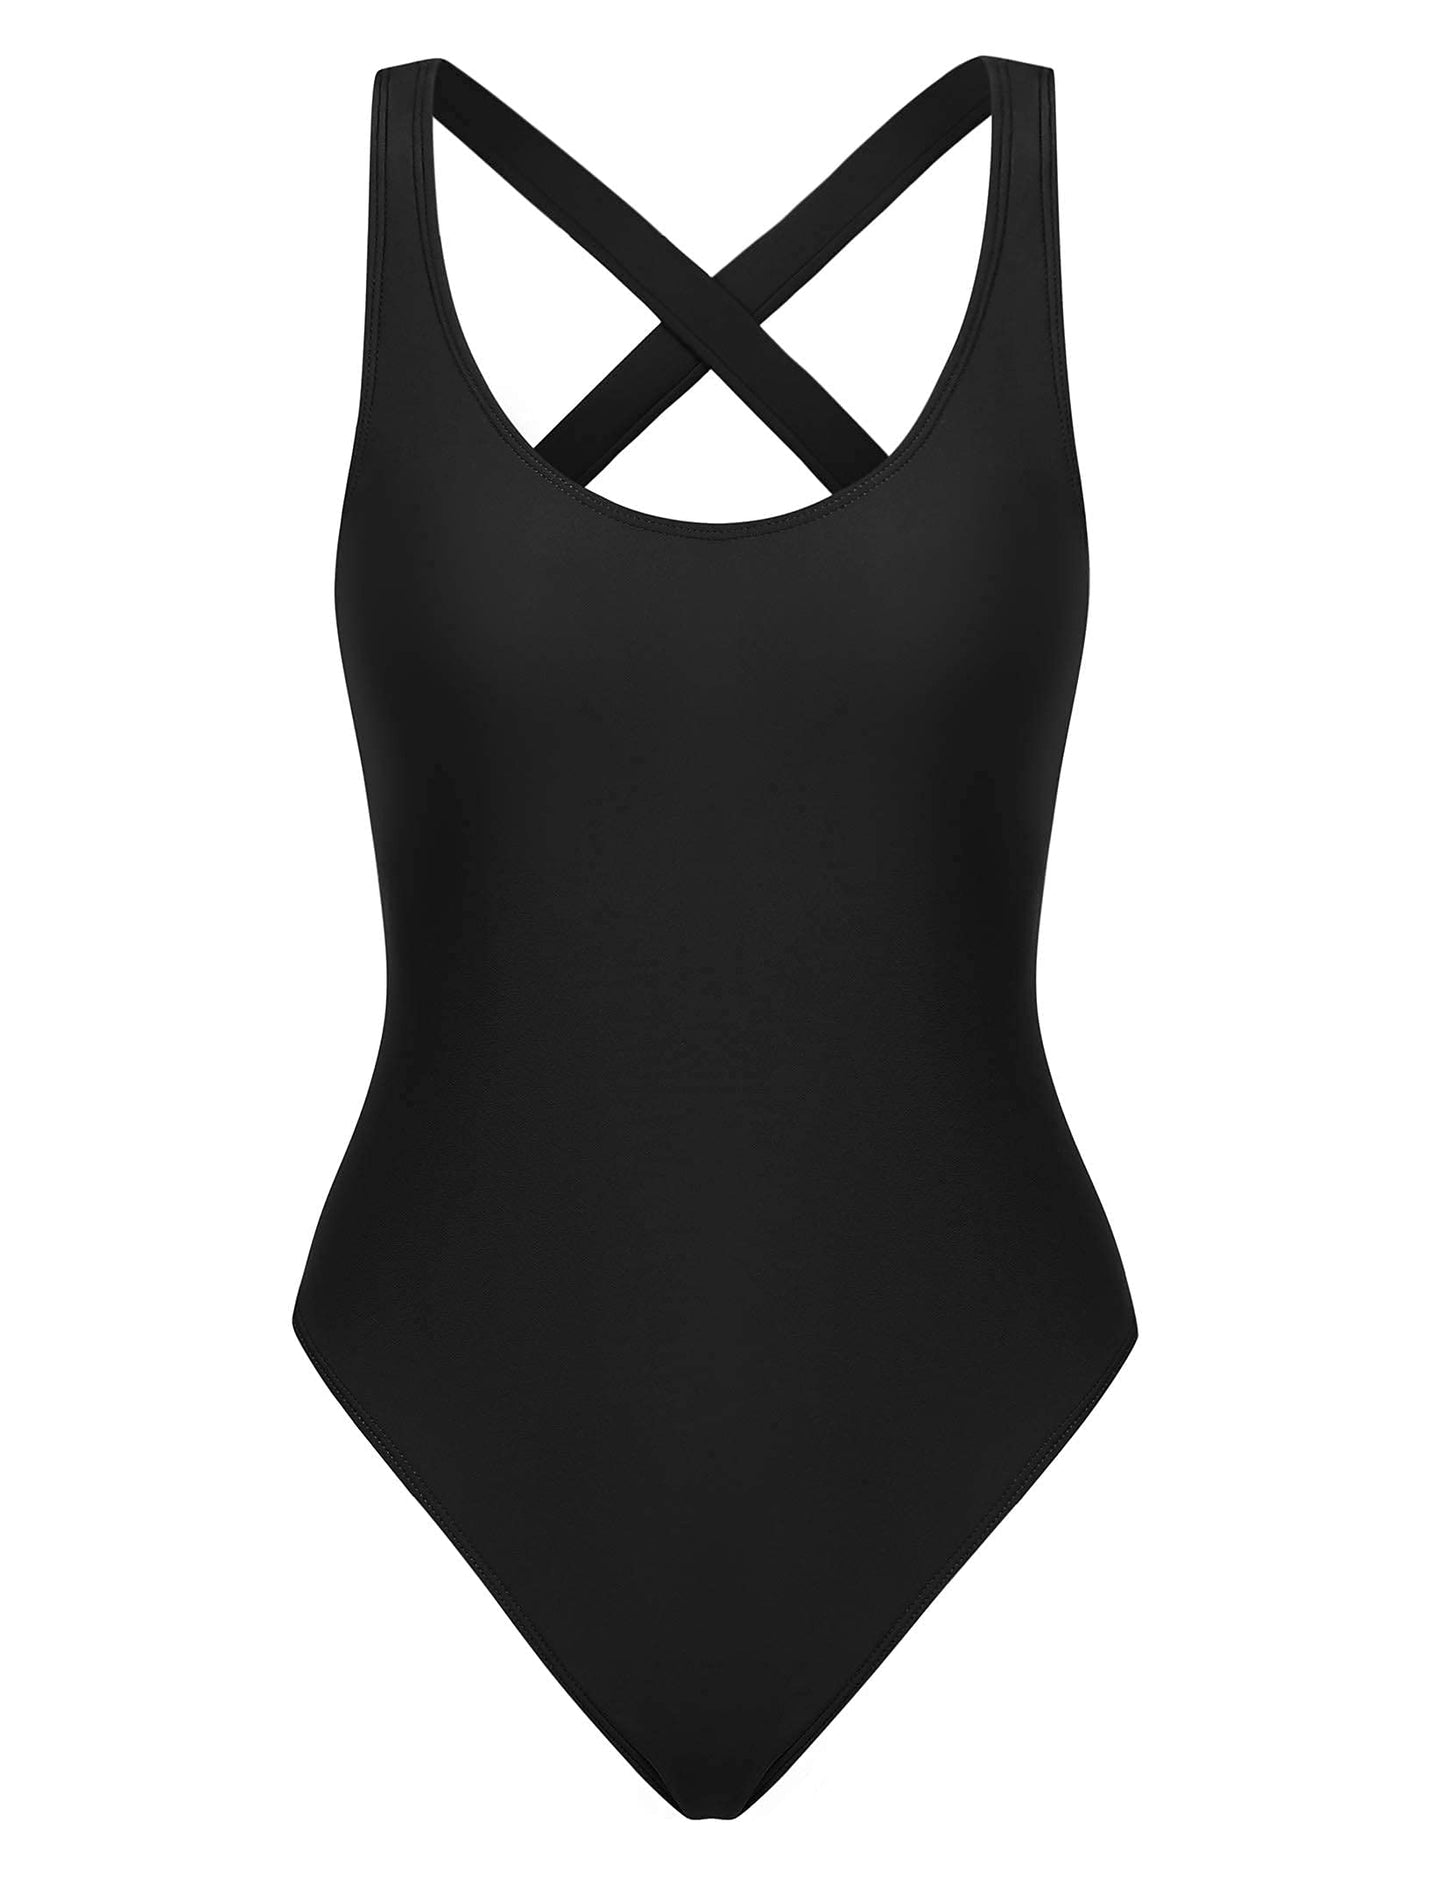 YESFASHION Women Athletic One Piece Swimsuit Racerback Competitive